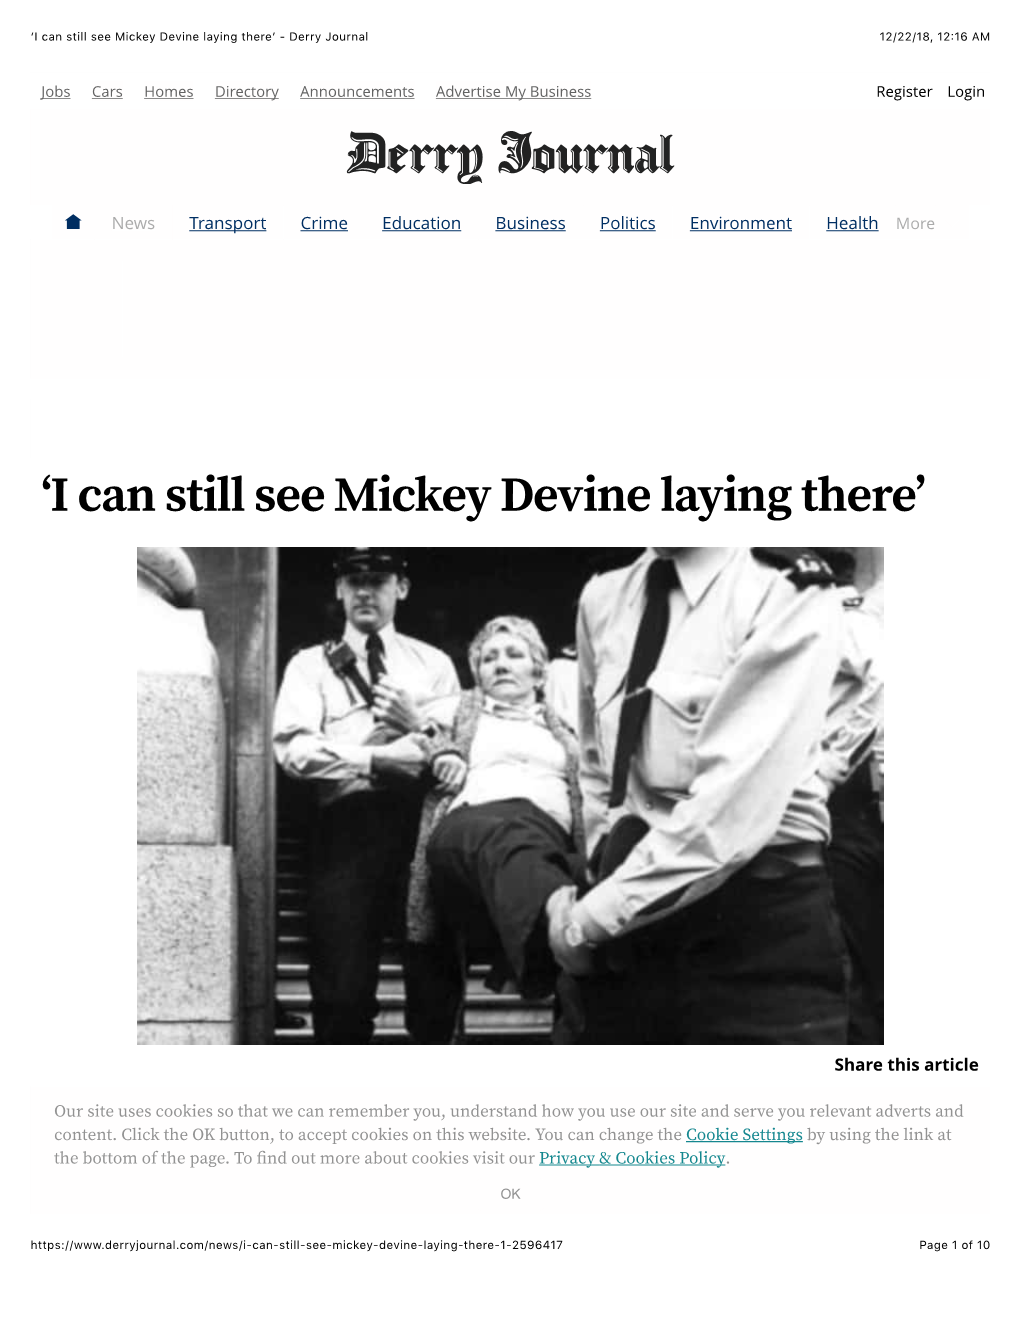 Derry Journal – “I Can Still See Mickey Devine Laying There”